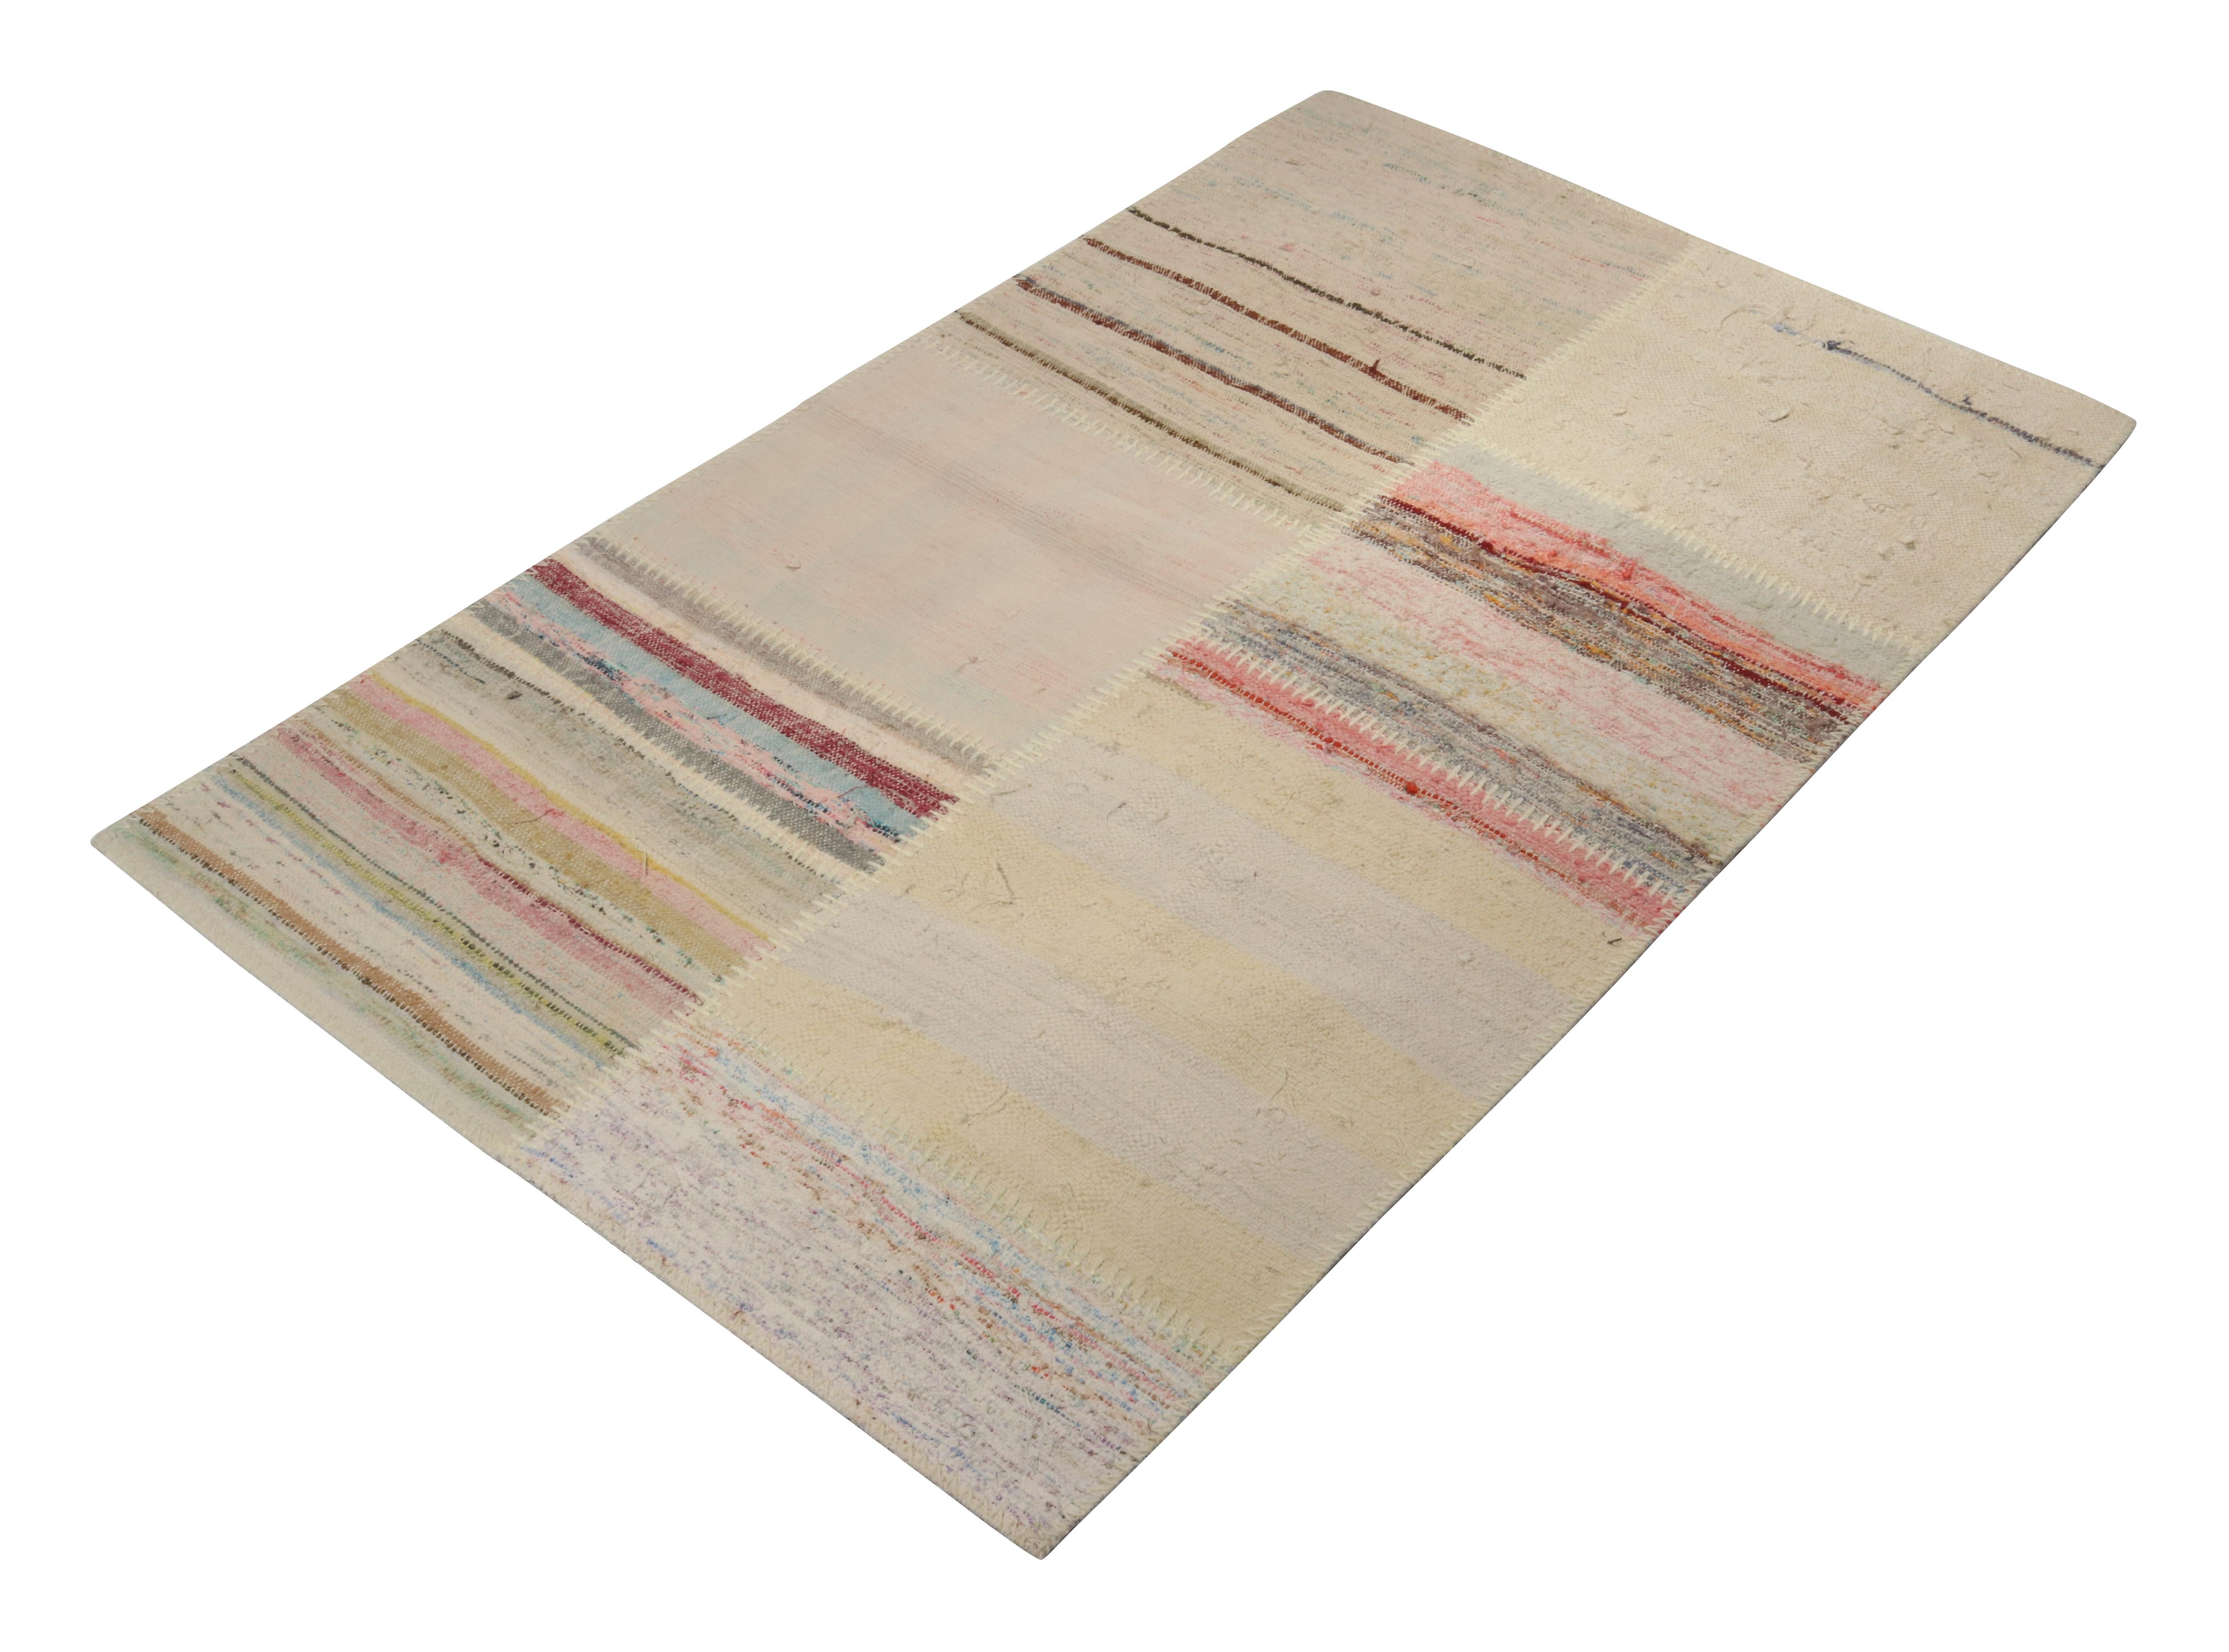 Handwoven in wool, Rug & Kilim presents a 3x5 contemporary rug from their innovative new patchwork kilim collection. 

On the Design: 

This flat weave technique repurposes vintage yarns in polychromatic stripes and striae, achieving a playful look